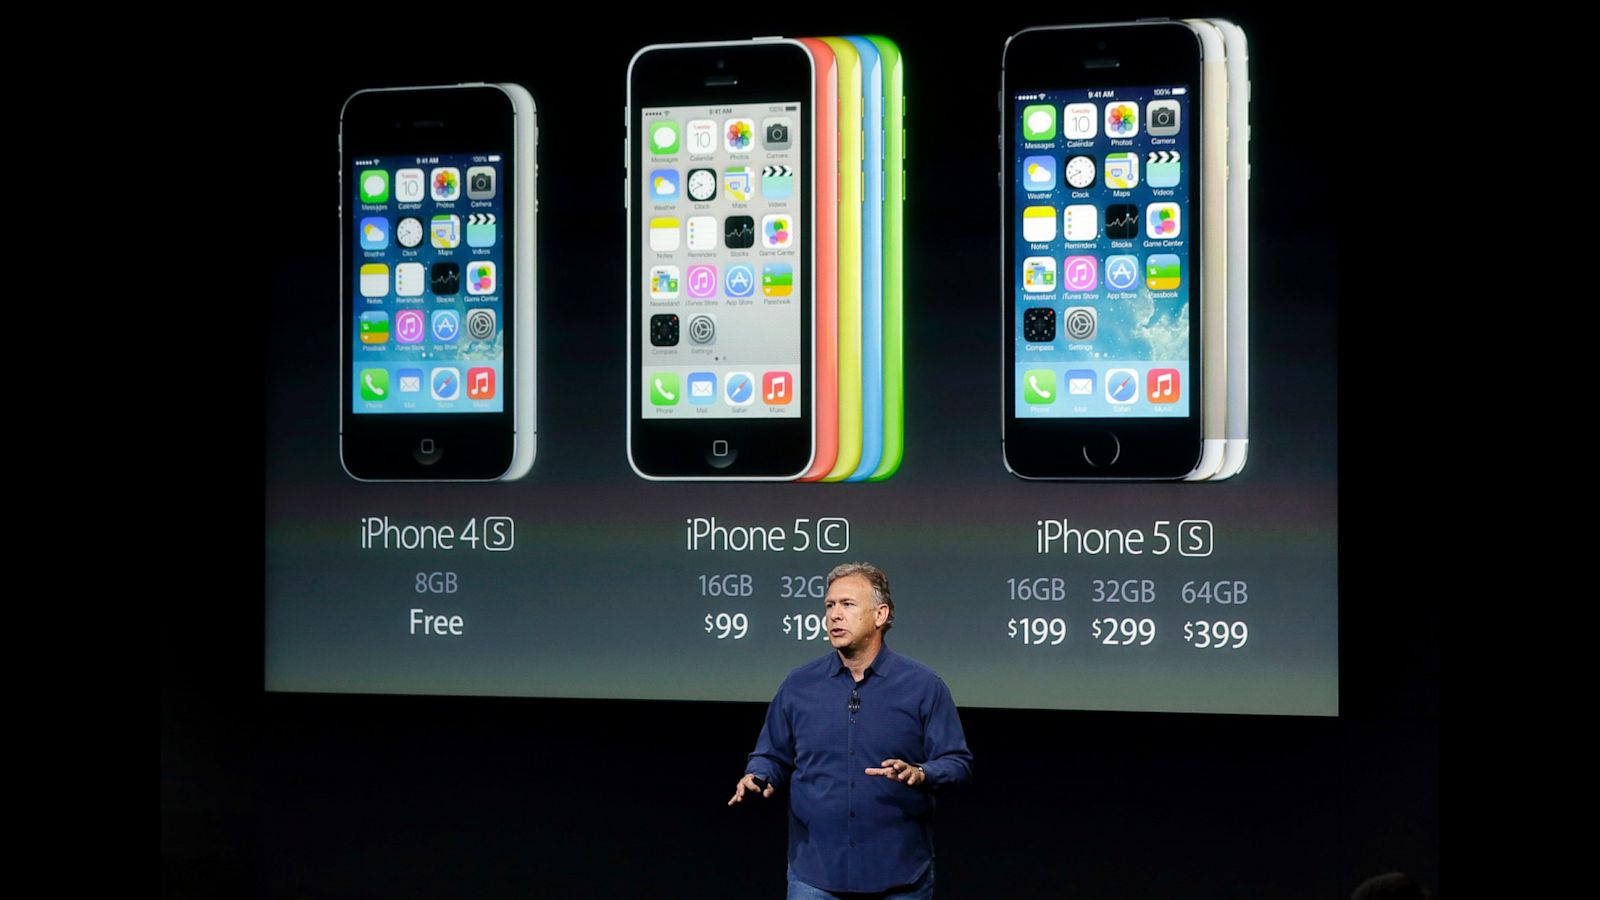 iPhone 5S and iPhone 5C Go On Sale - ABC News